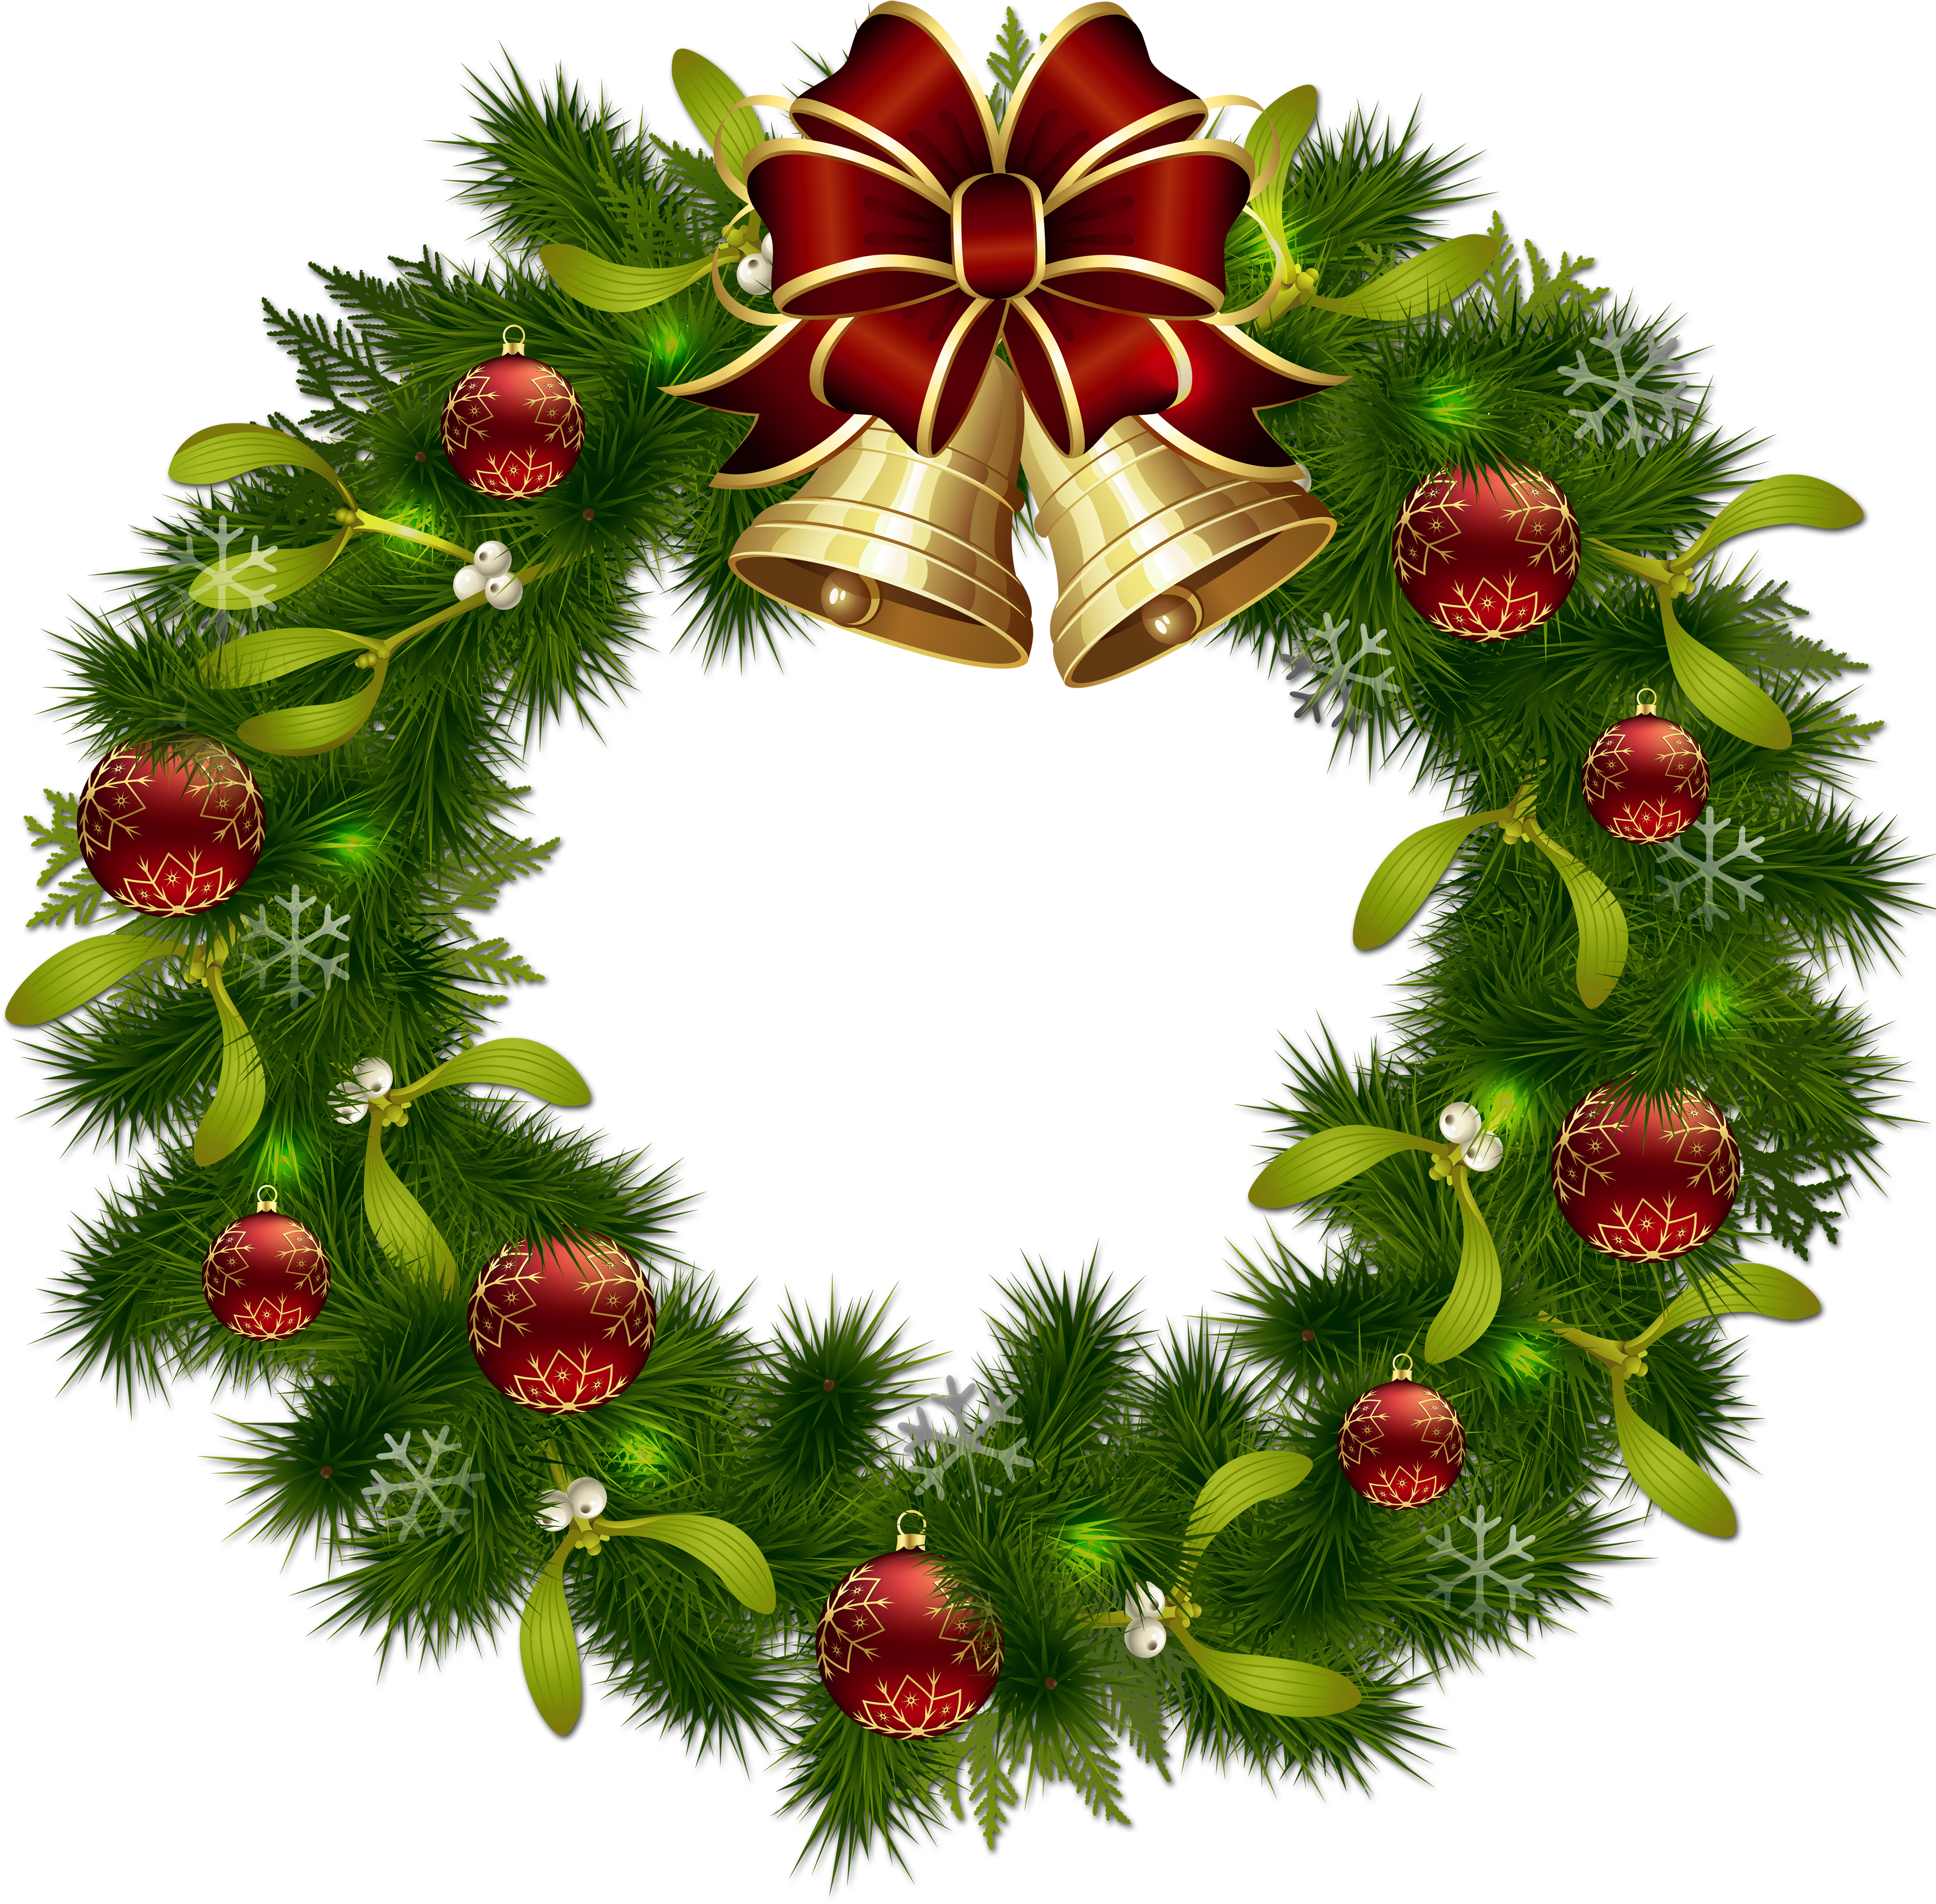 Transparent Christmas Pinecone Wreath With Gold Bells - Christmas Wreath Clip Art (4000x3943)